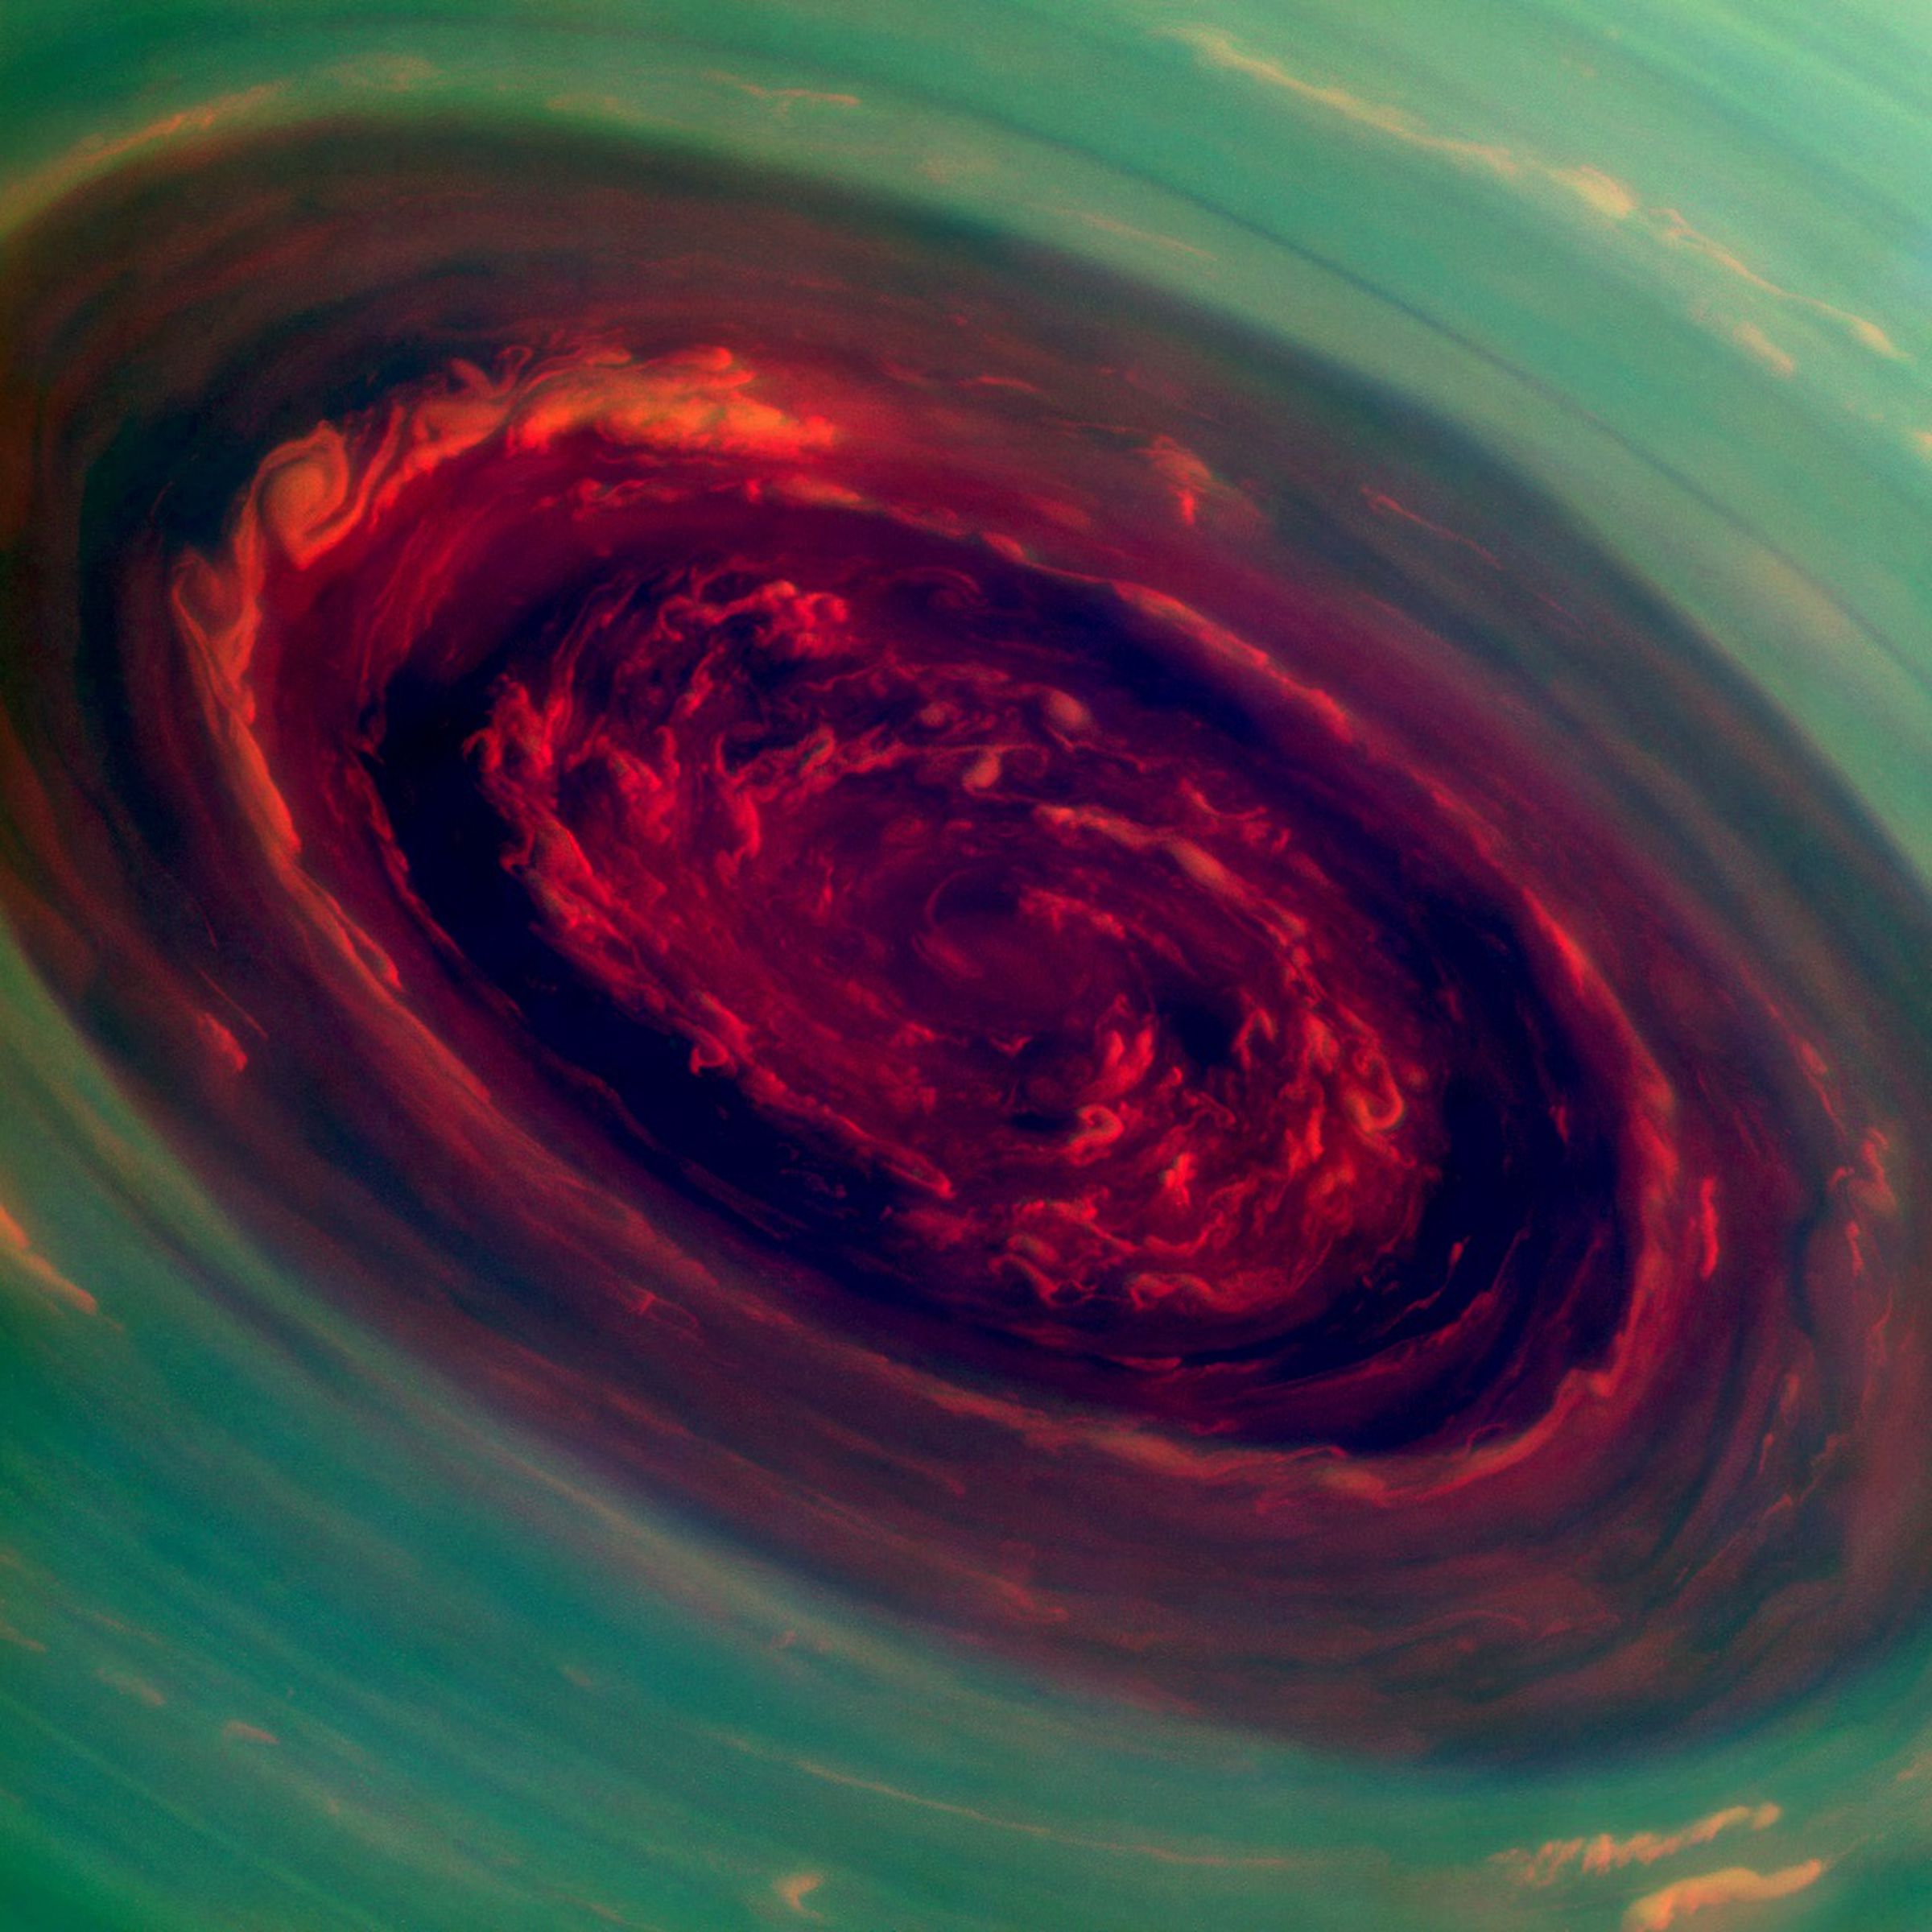 Spinning vortex of Saturn's north polar storm, photographed on November 27th, 2012.